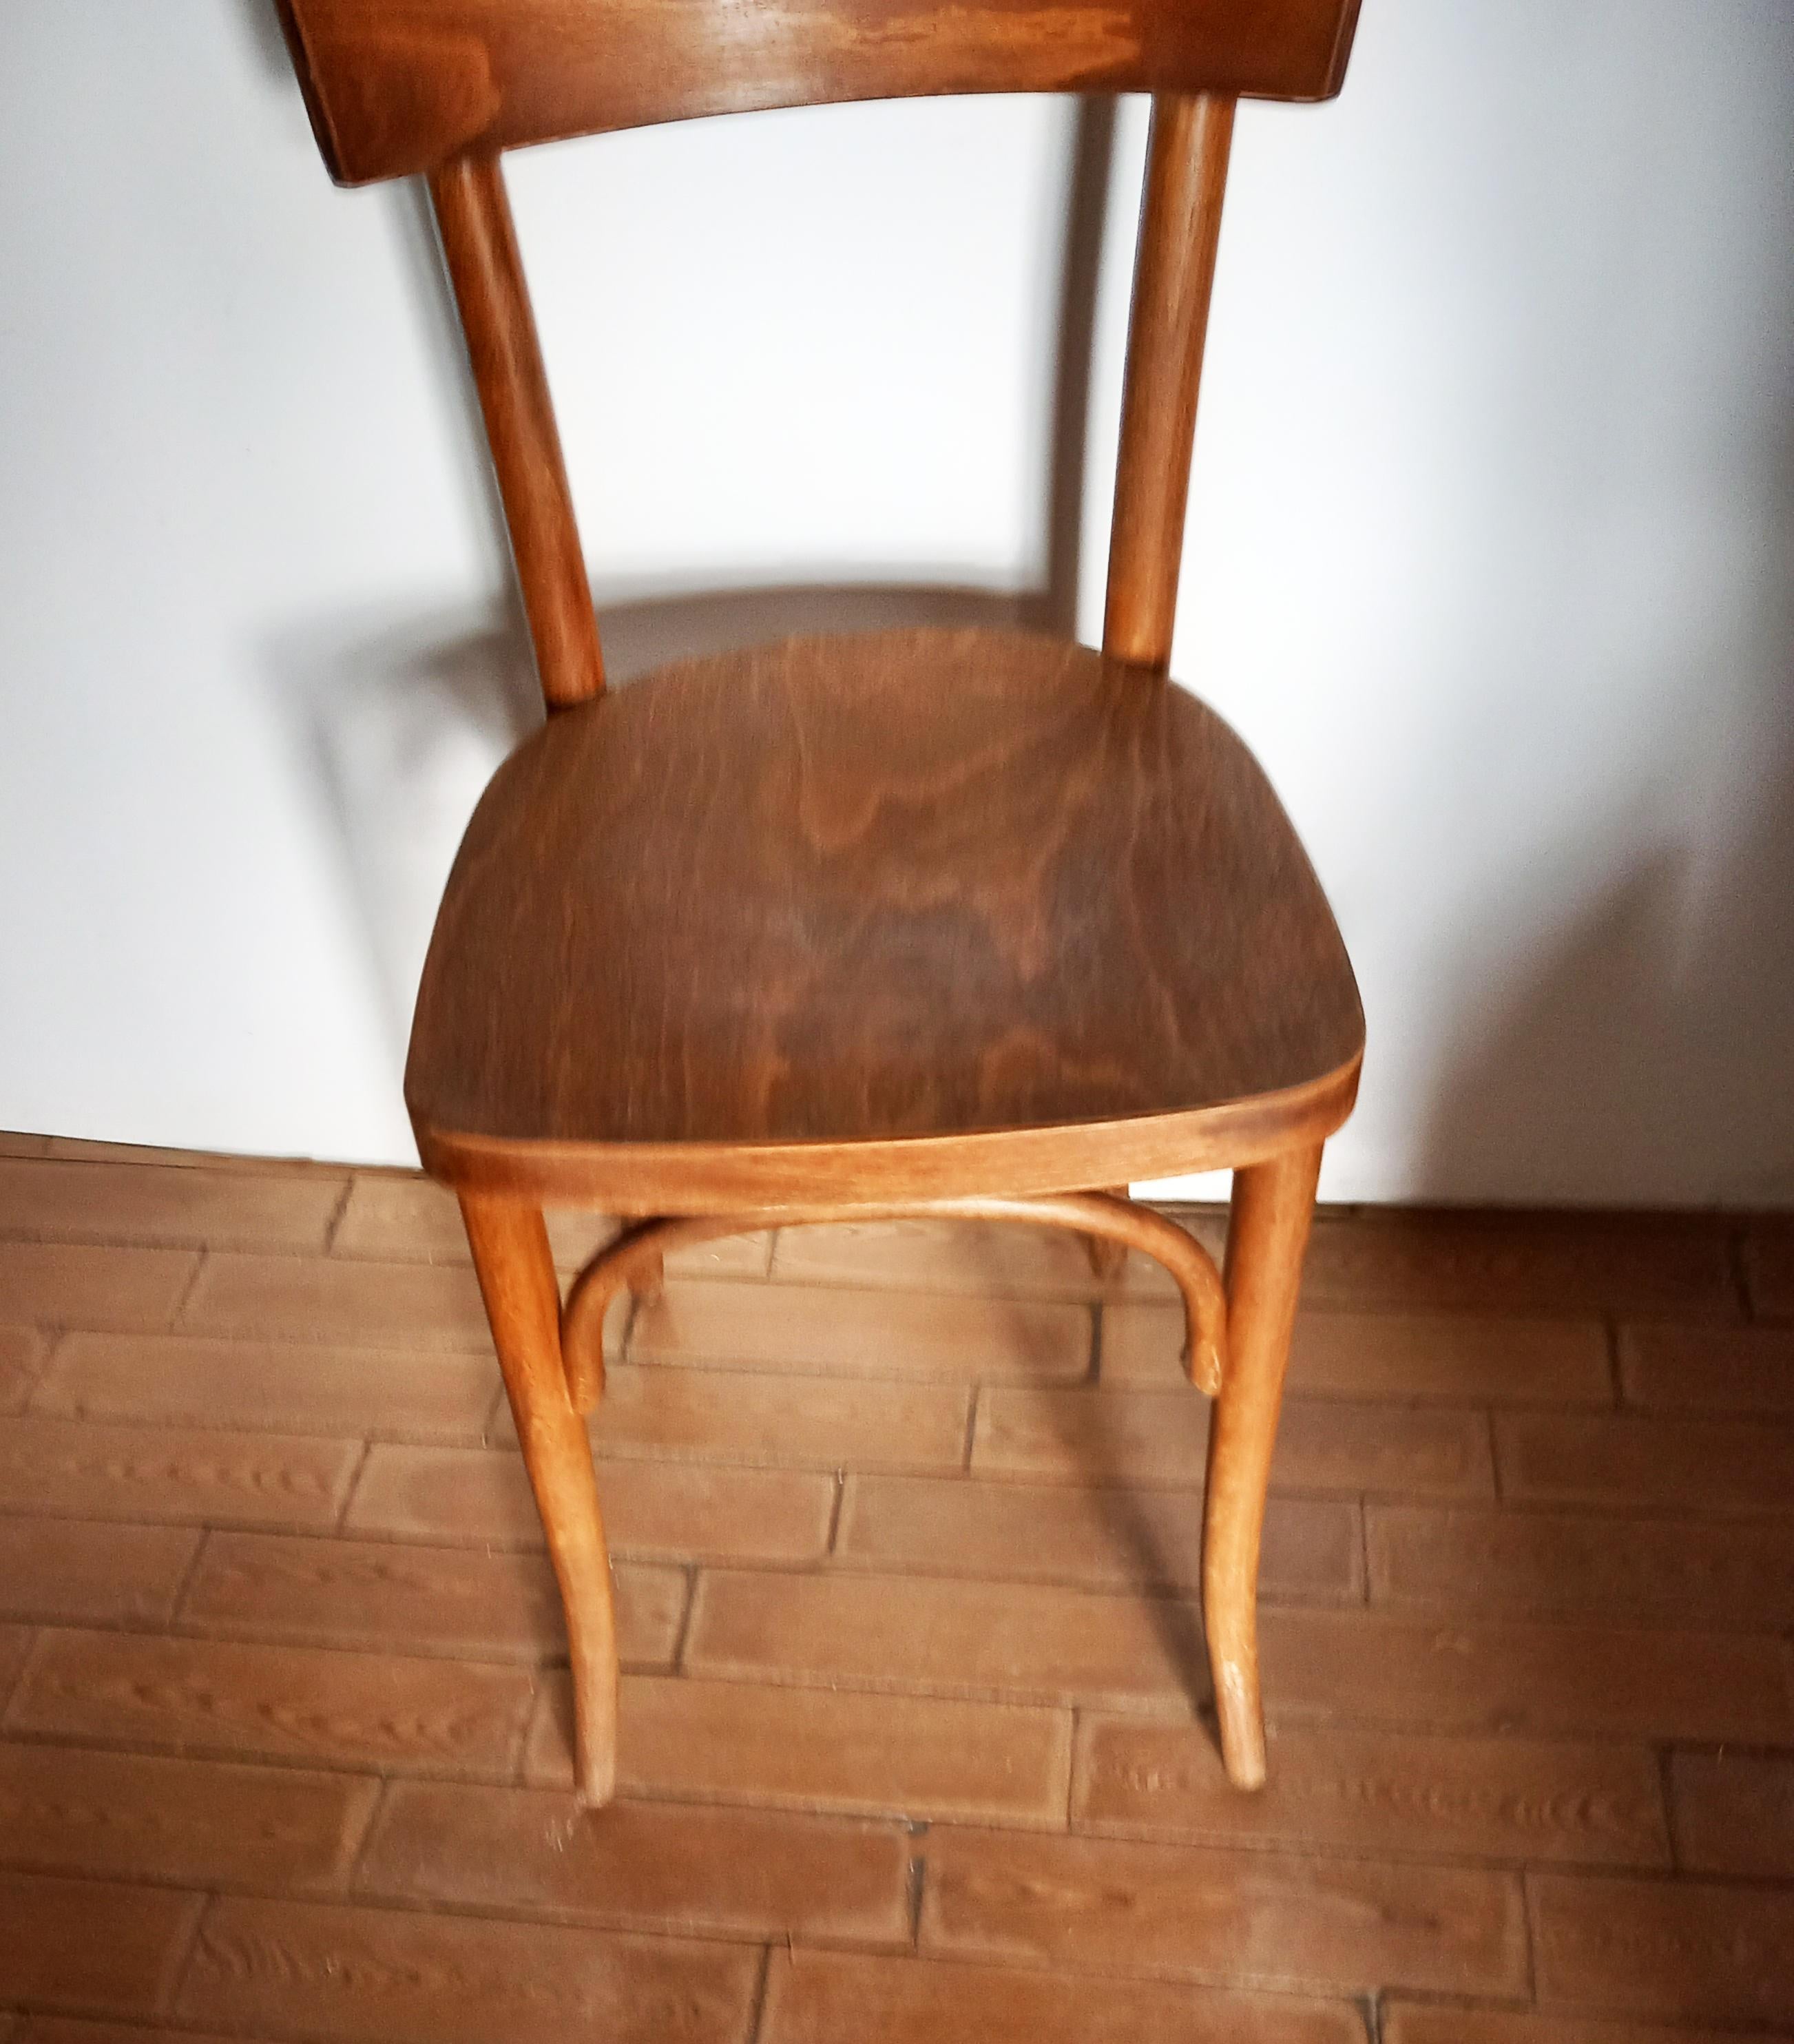 August Thonet Chairs, Set of 6, Czech Republic, 50s Signed Thonet In Good Condition For Sale In Mombuey, Zamora